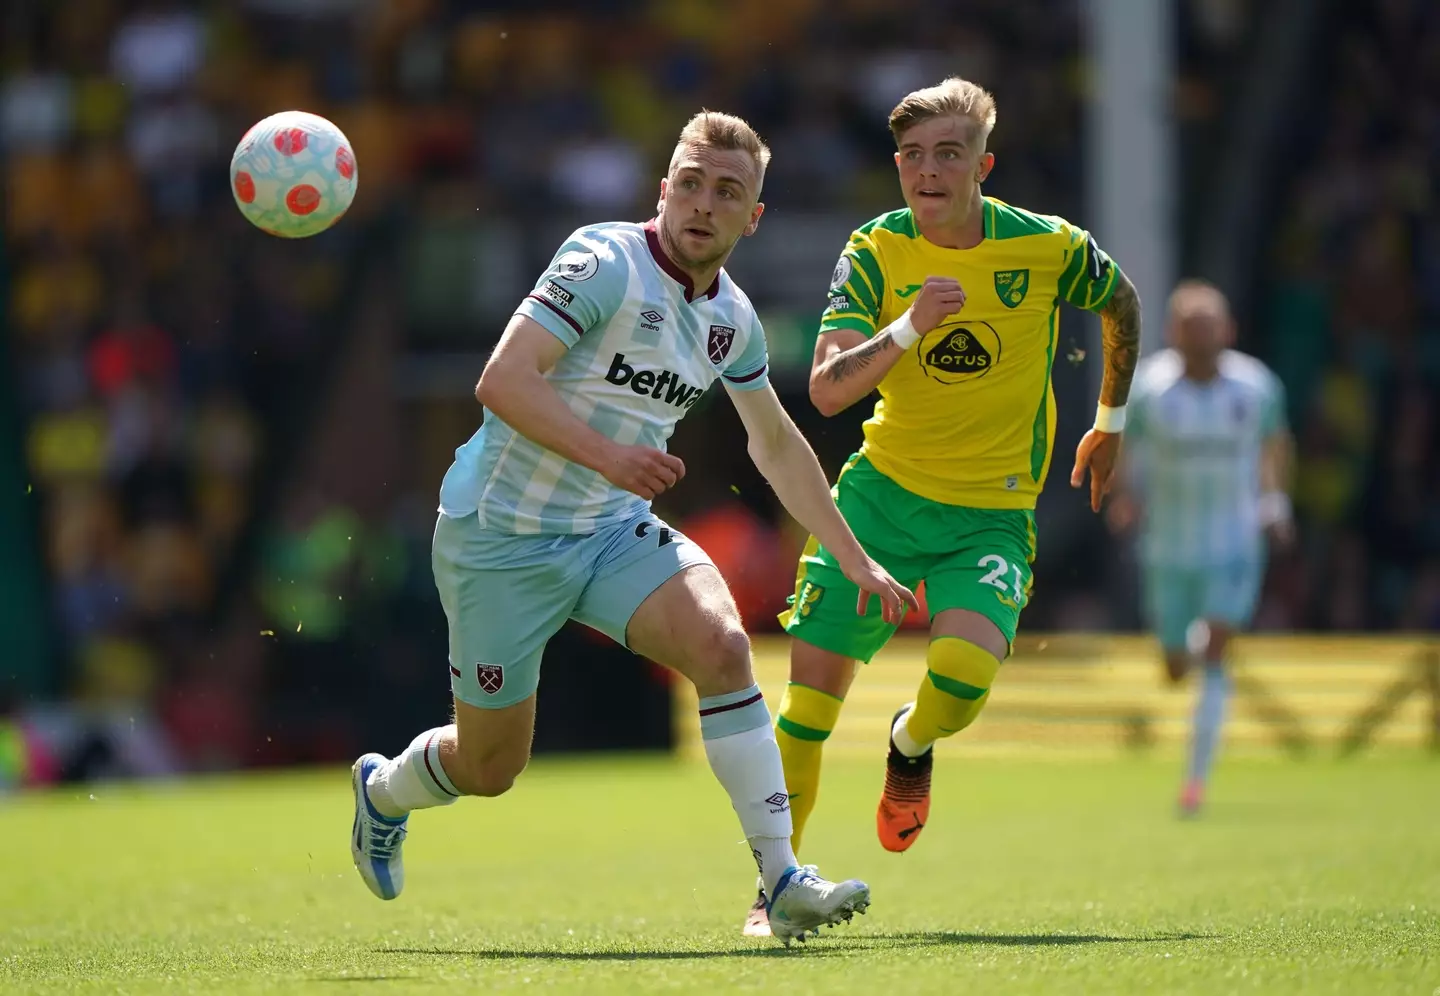 Williams up against West Ham's Jarrod Bowen at the weekend. Image: PA Images